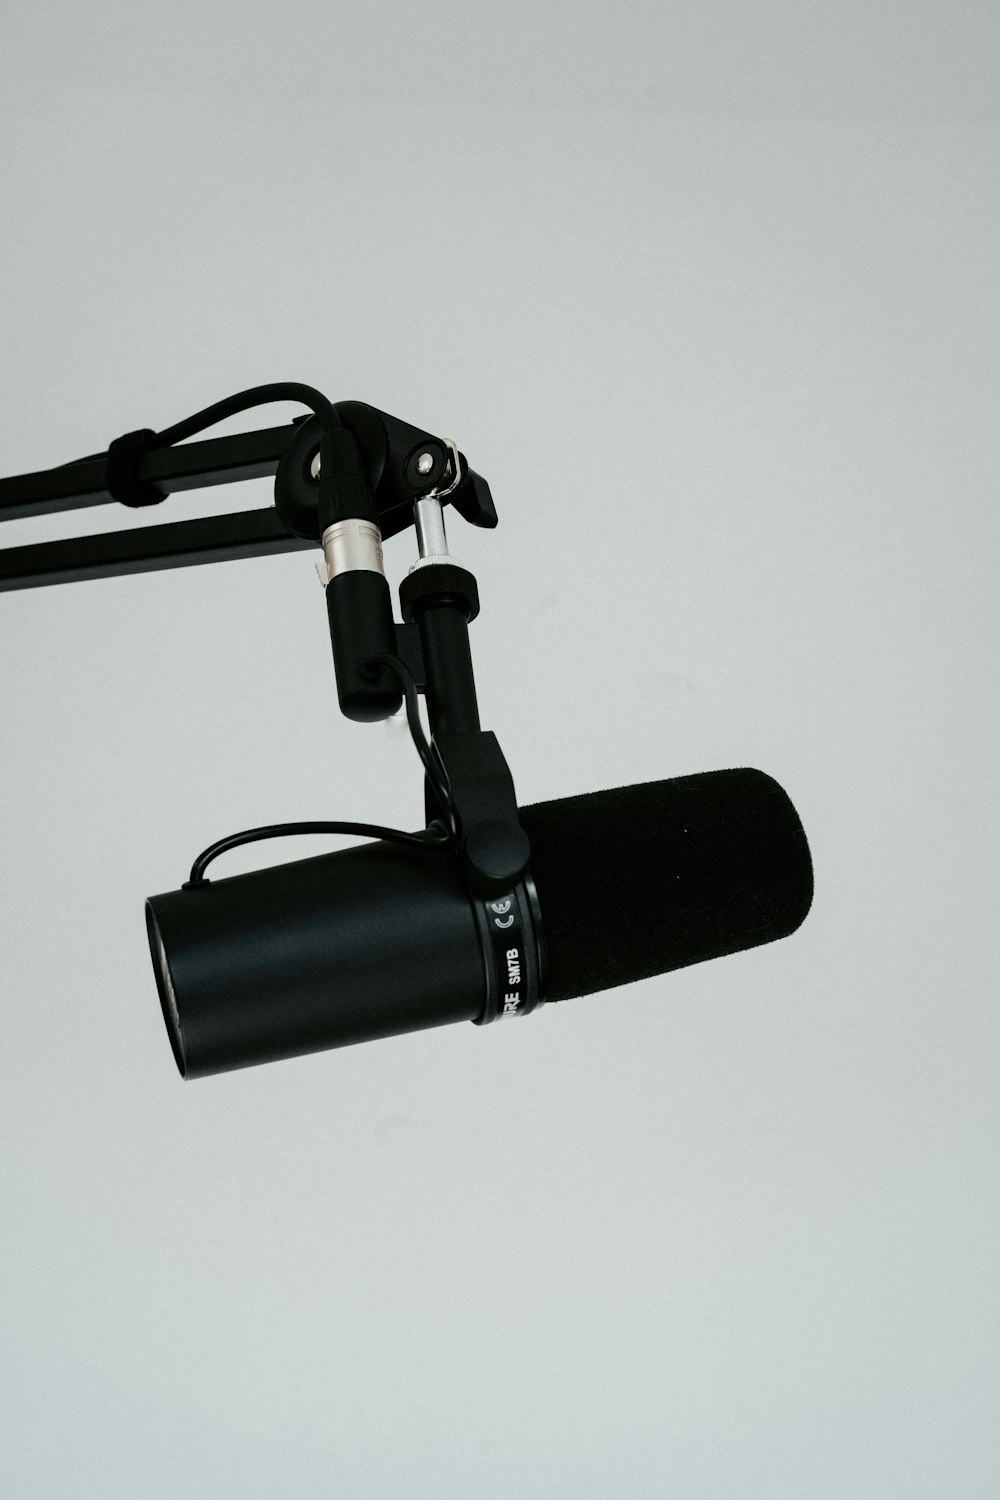 a microphone attached to a tripod on a white background